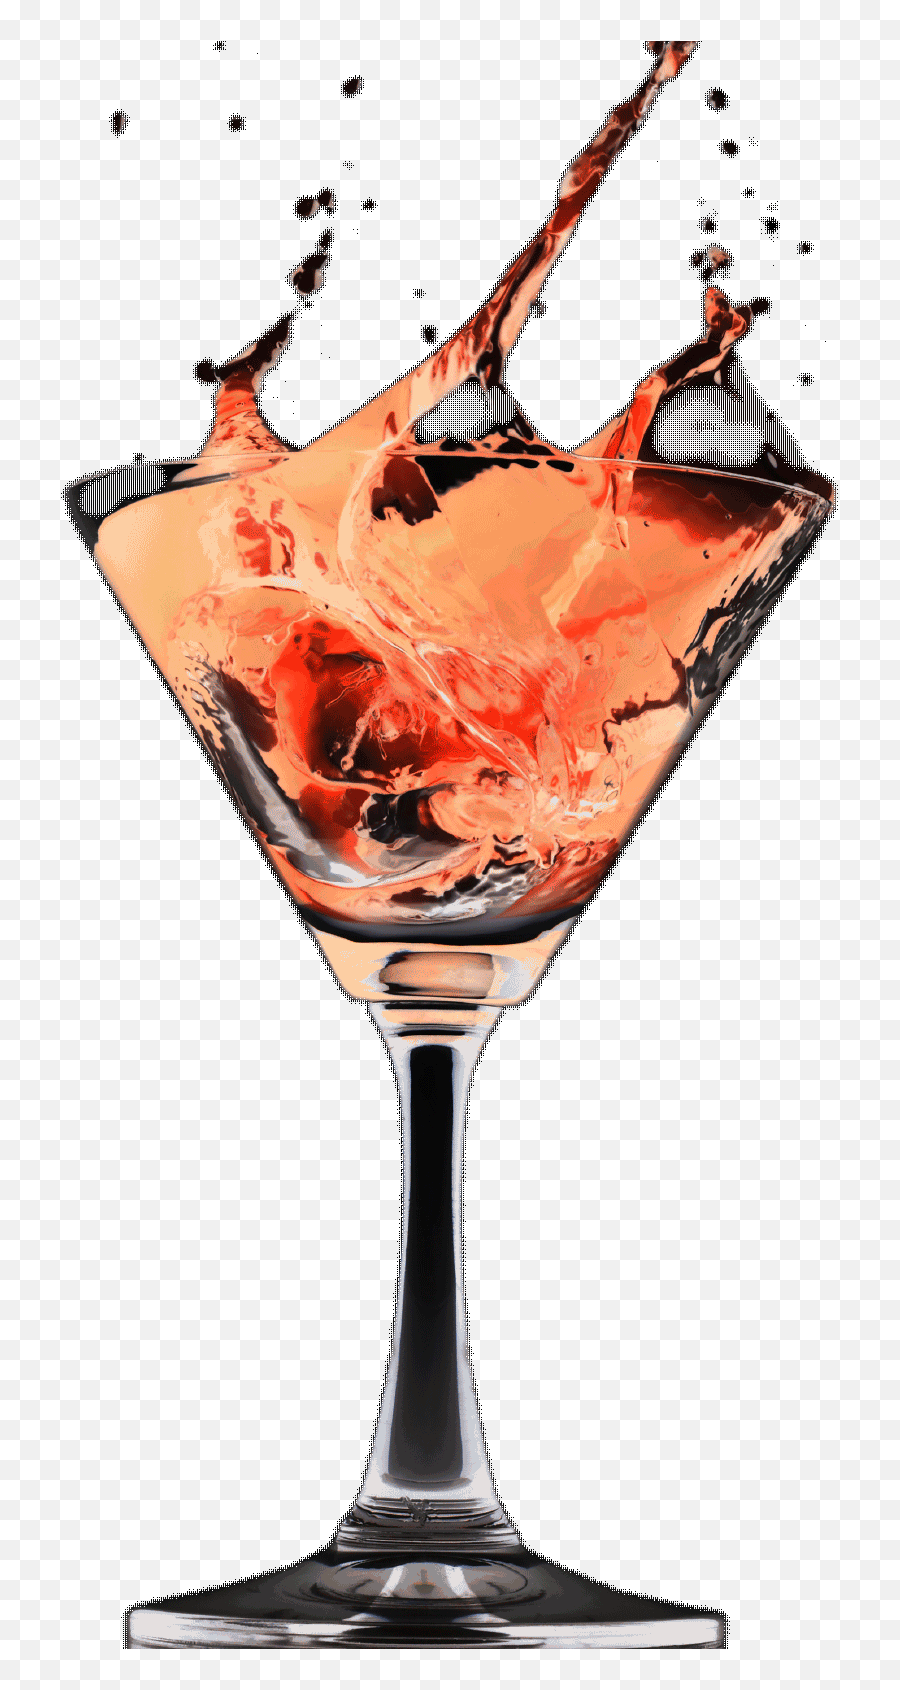 Popular And Trending Martini Glass Stickers On Picsart - Martini Glass Emoji,Martini Glass Emoji